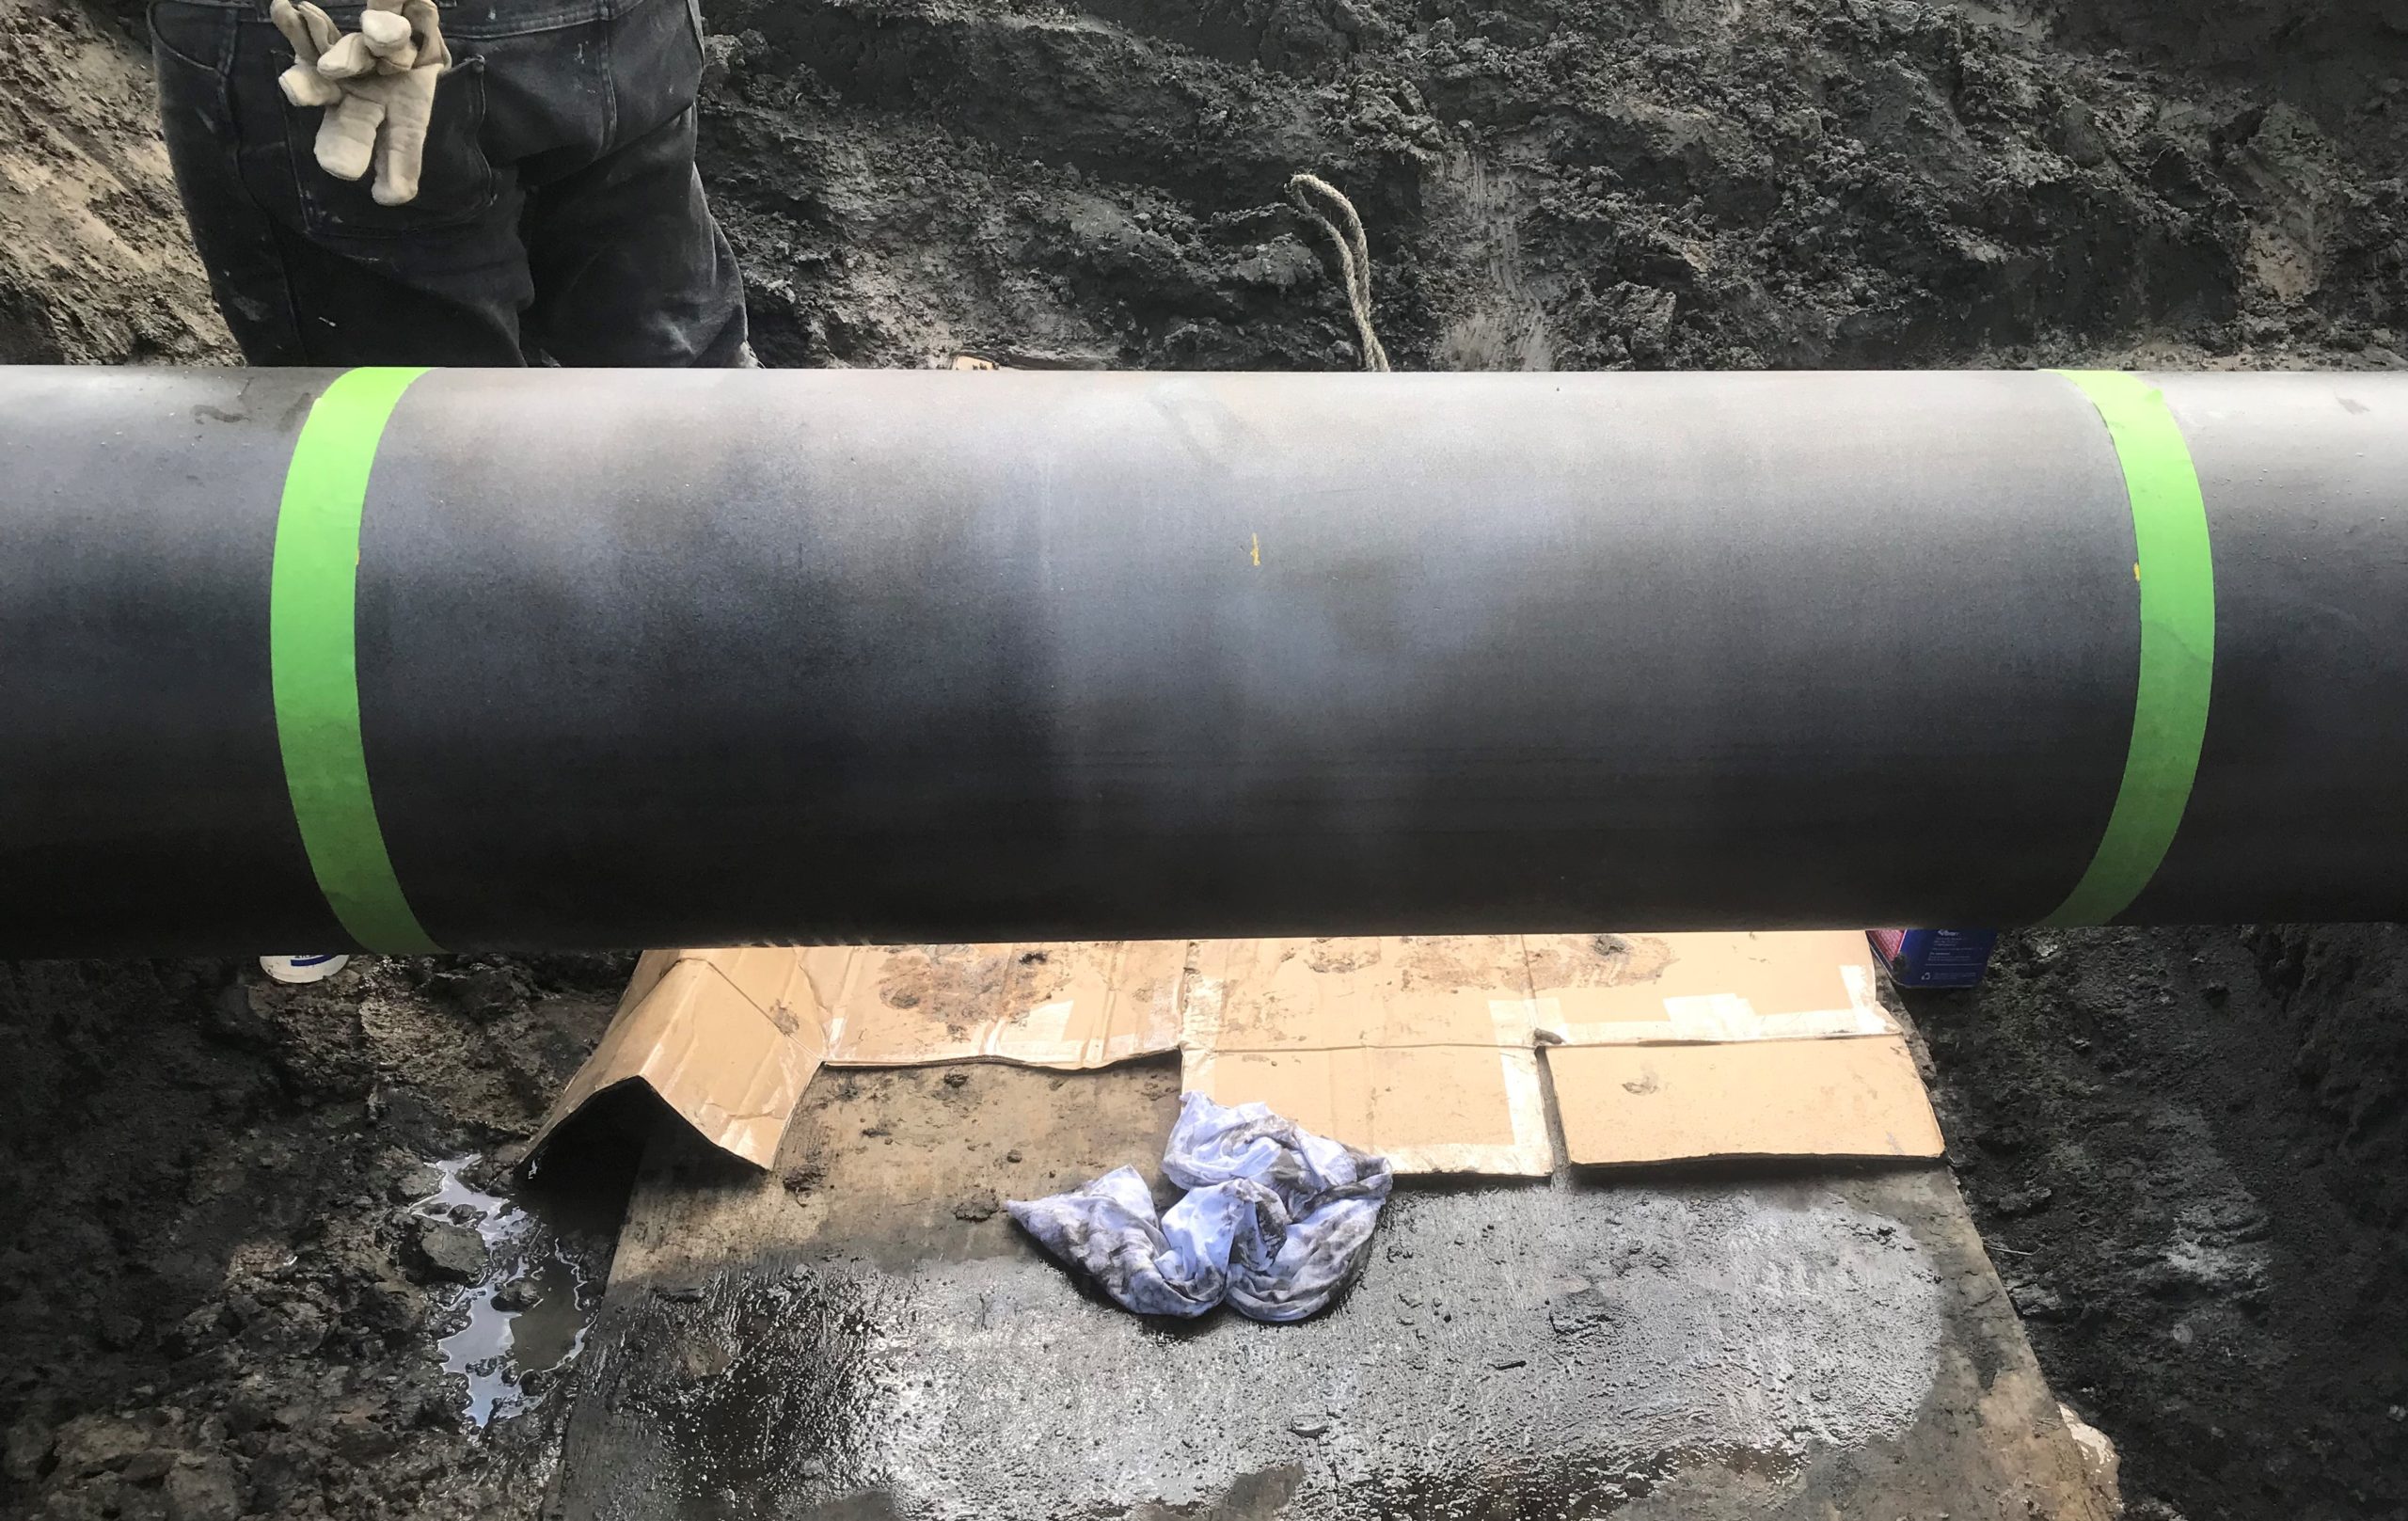 Technicians prepared the pipe surface to a near-white profile and wiped it with acetone in preparation for the composite installation.